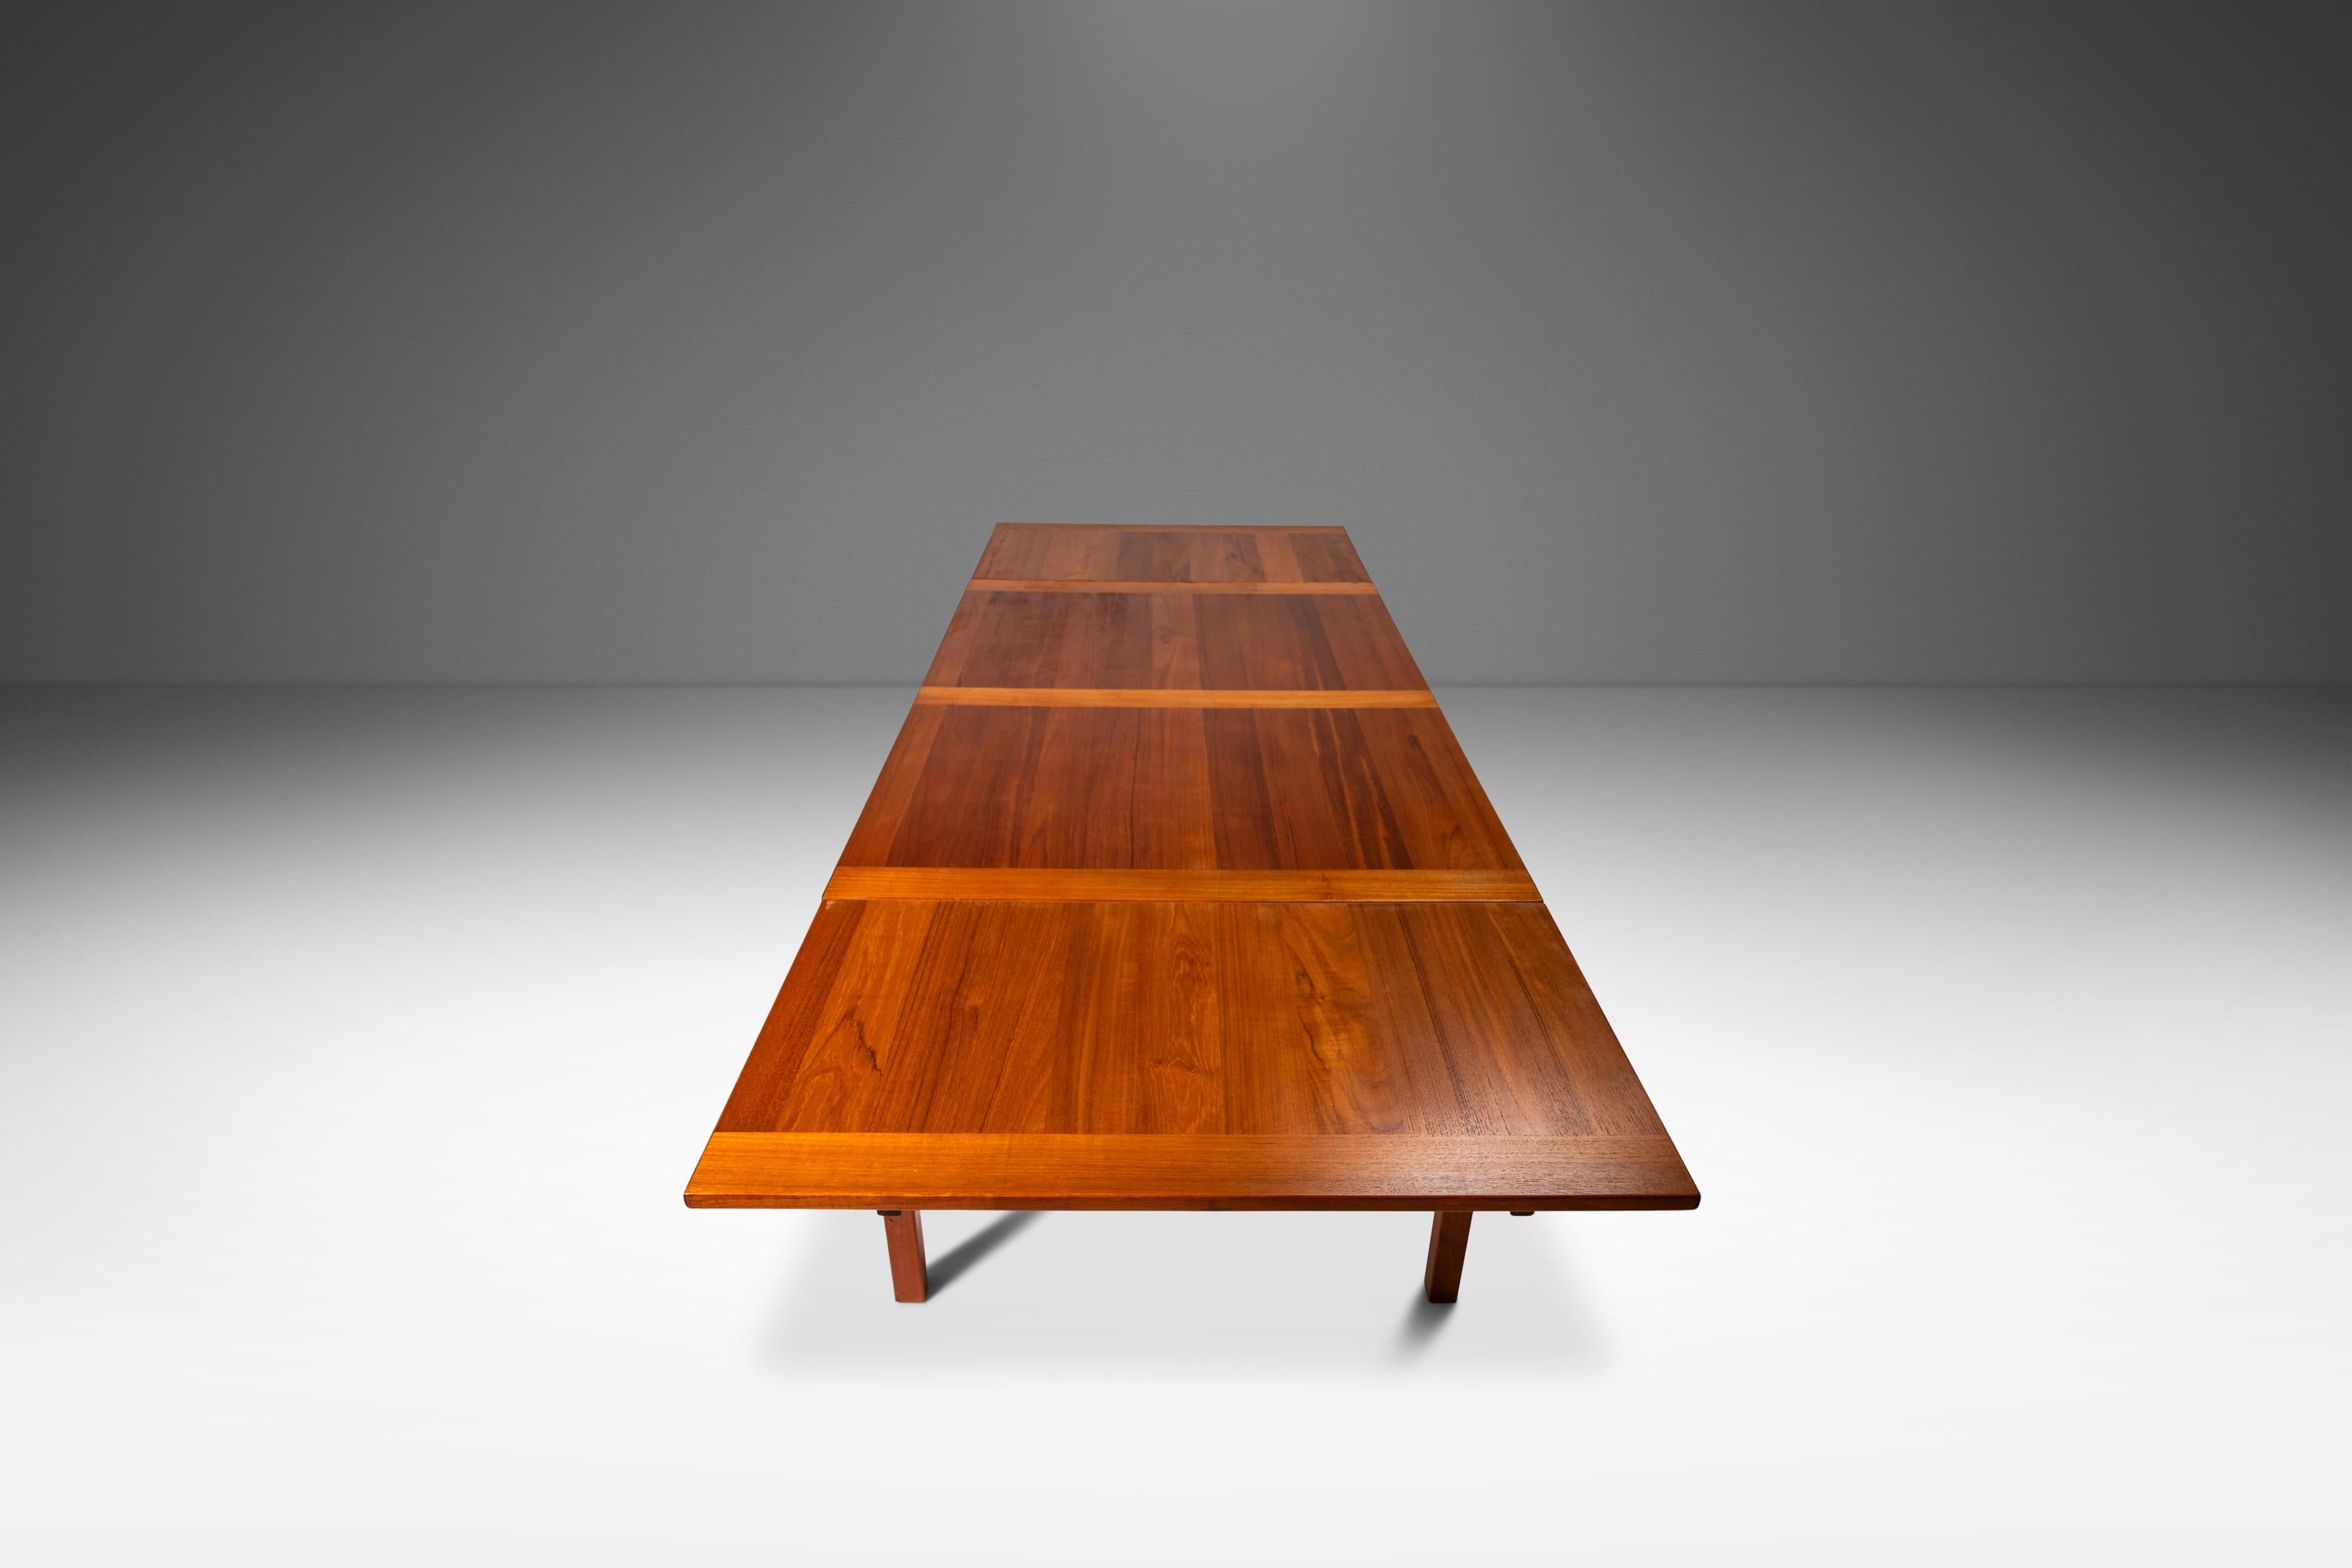 Danish Teak Extension Dining Table with Stow-in-Table Leaves, Denmark, c. 1970s For Sale 1